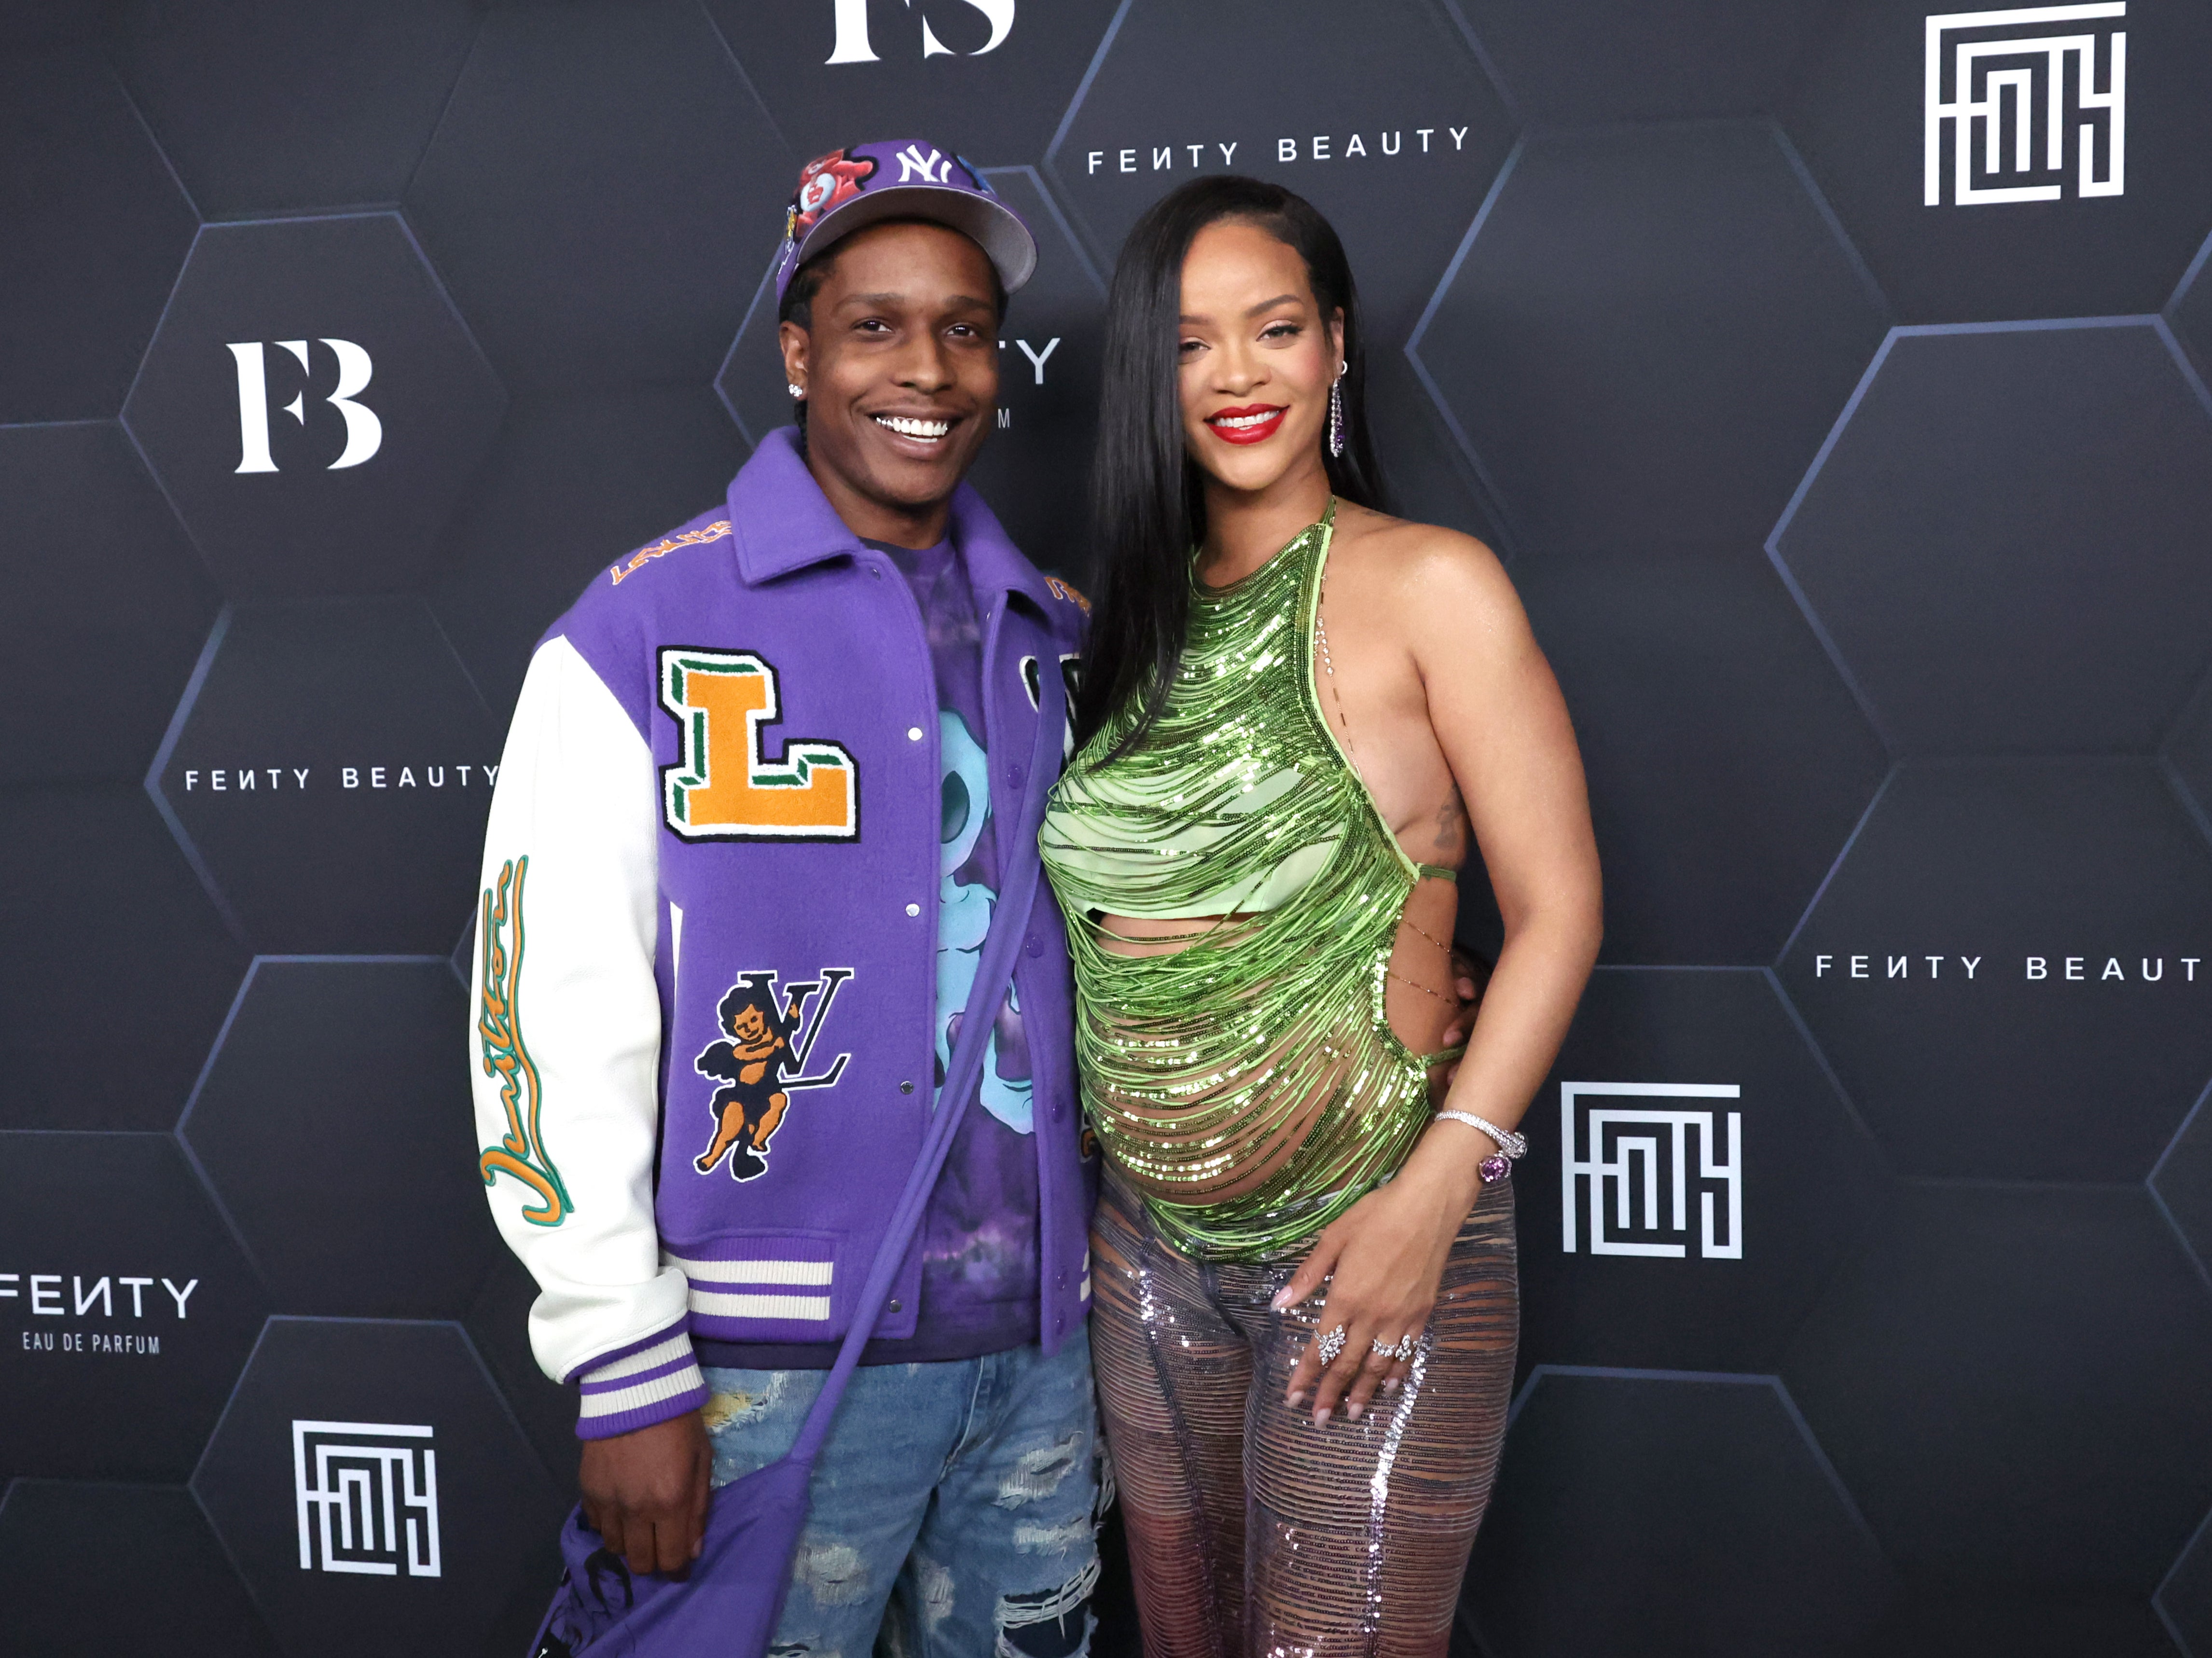 Rihanna and ASAP Rocky spent Christmas in Barbados together